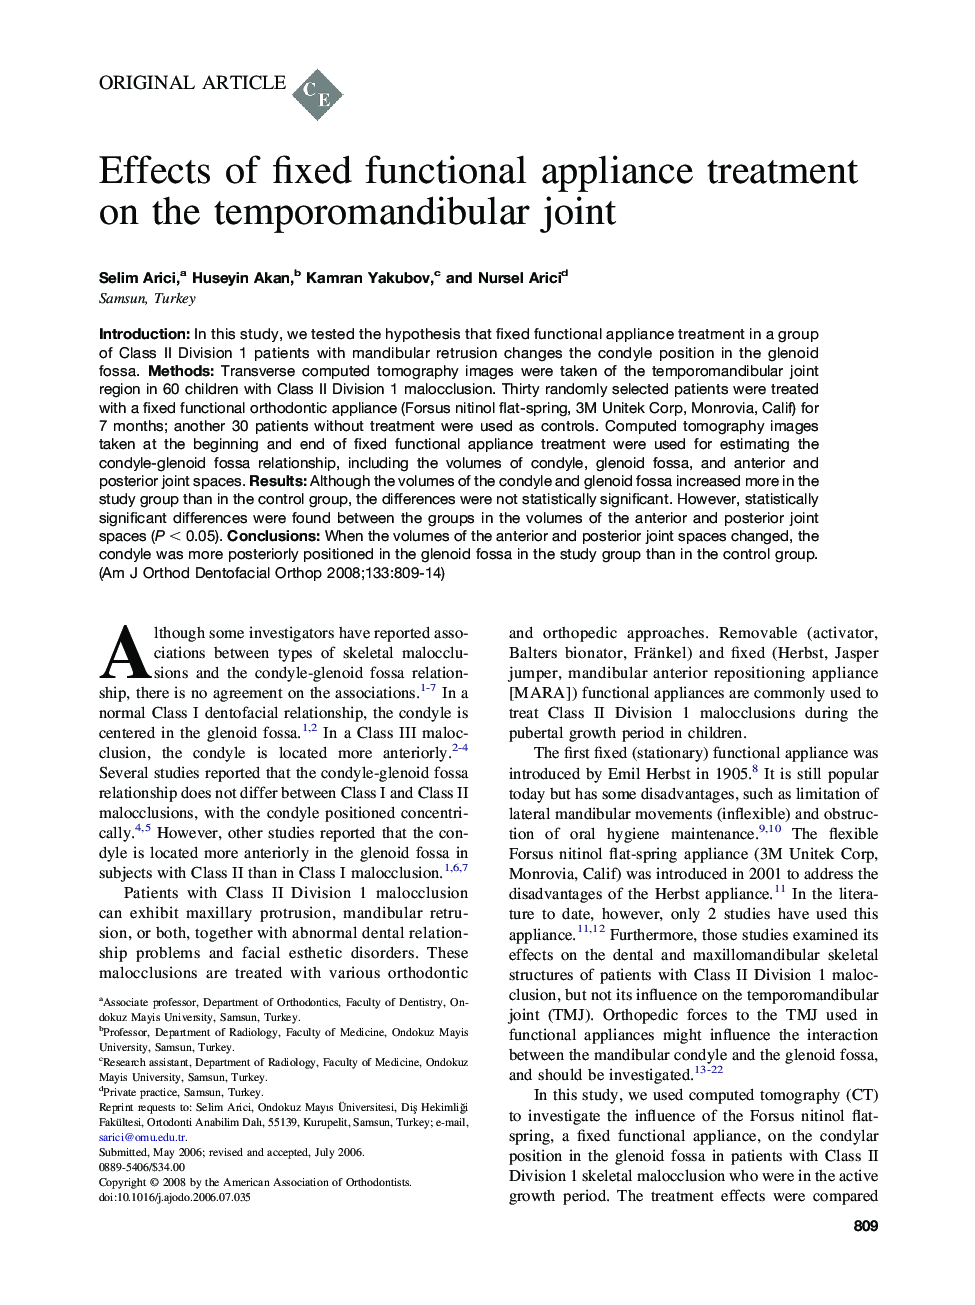 Effects of fixed functional appliance treatment on the temporomandibular joint